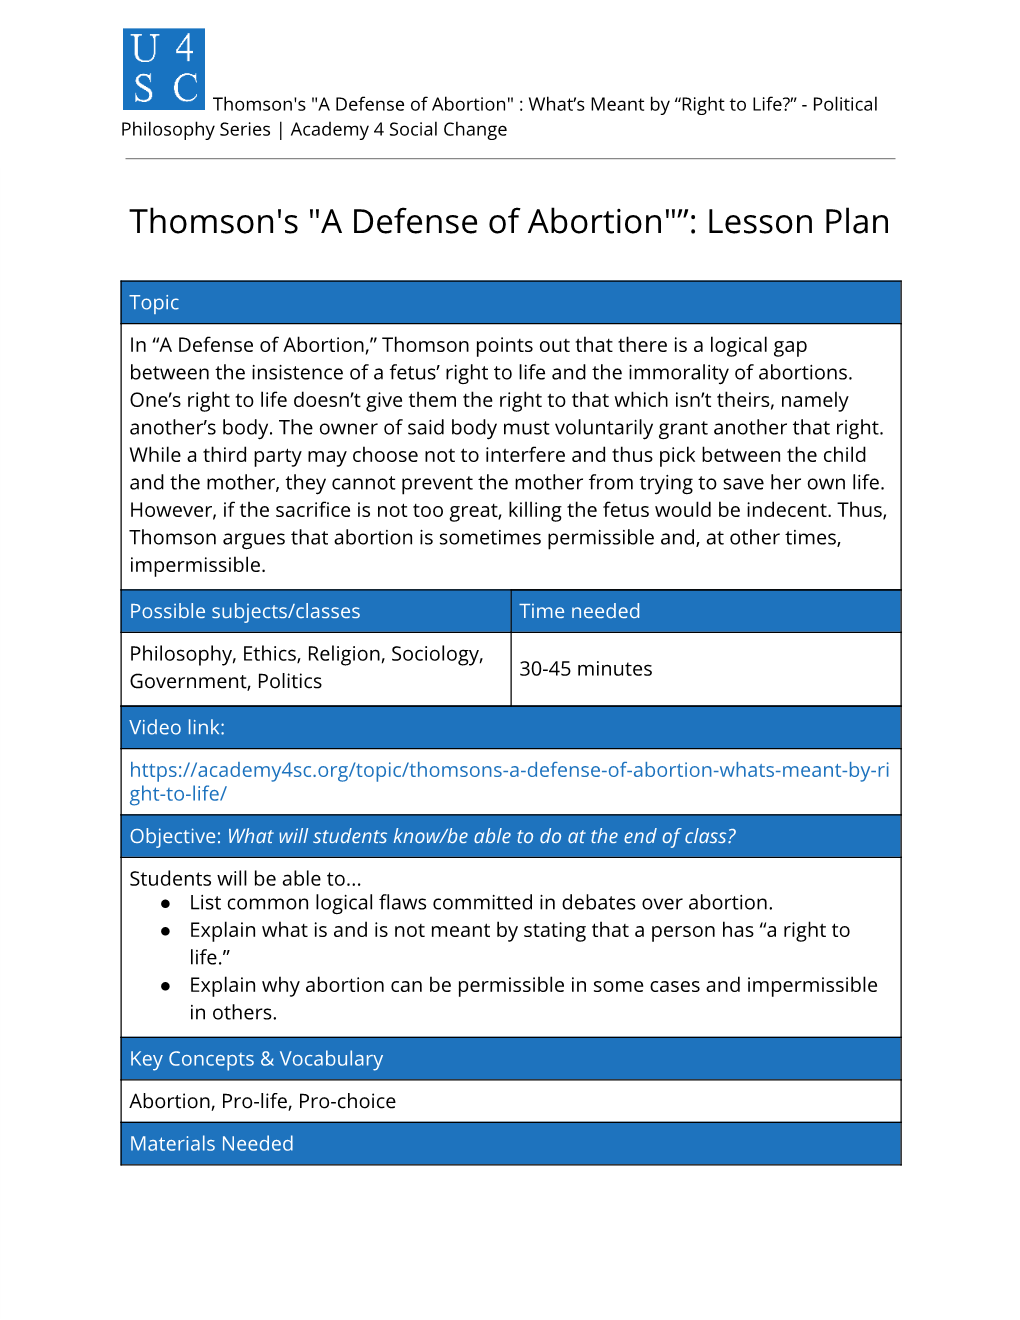 Thomson's "A Defense of Abortion" : What’S Meant by “Right to Life?” - Political Philosophy Series | Academy 4 Social Change